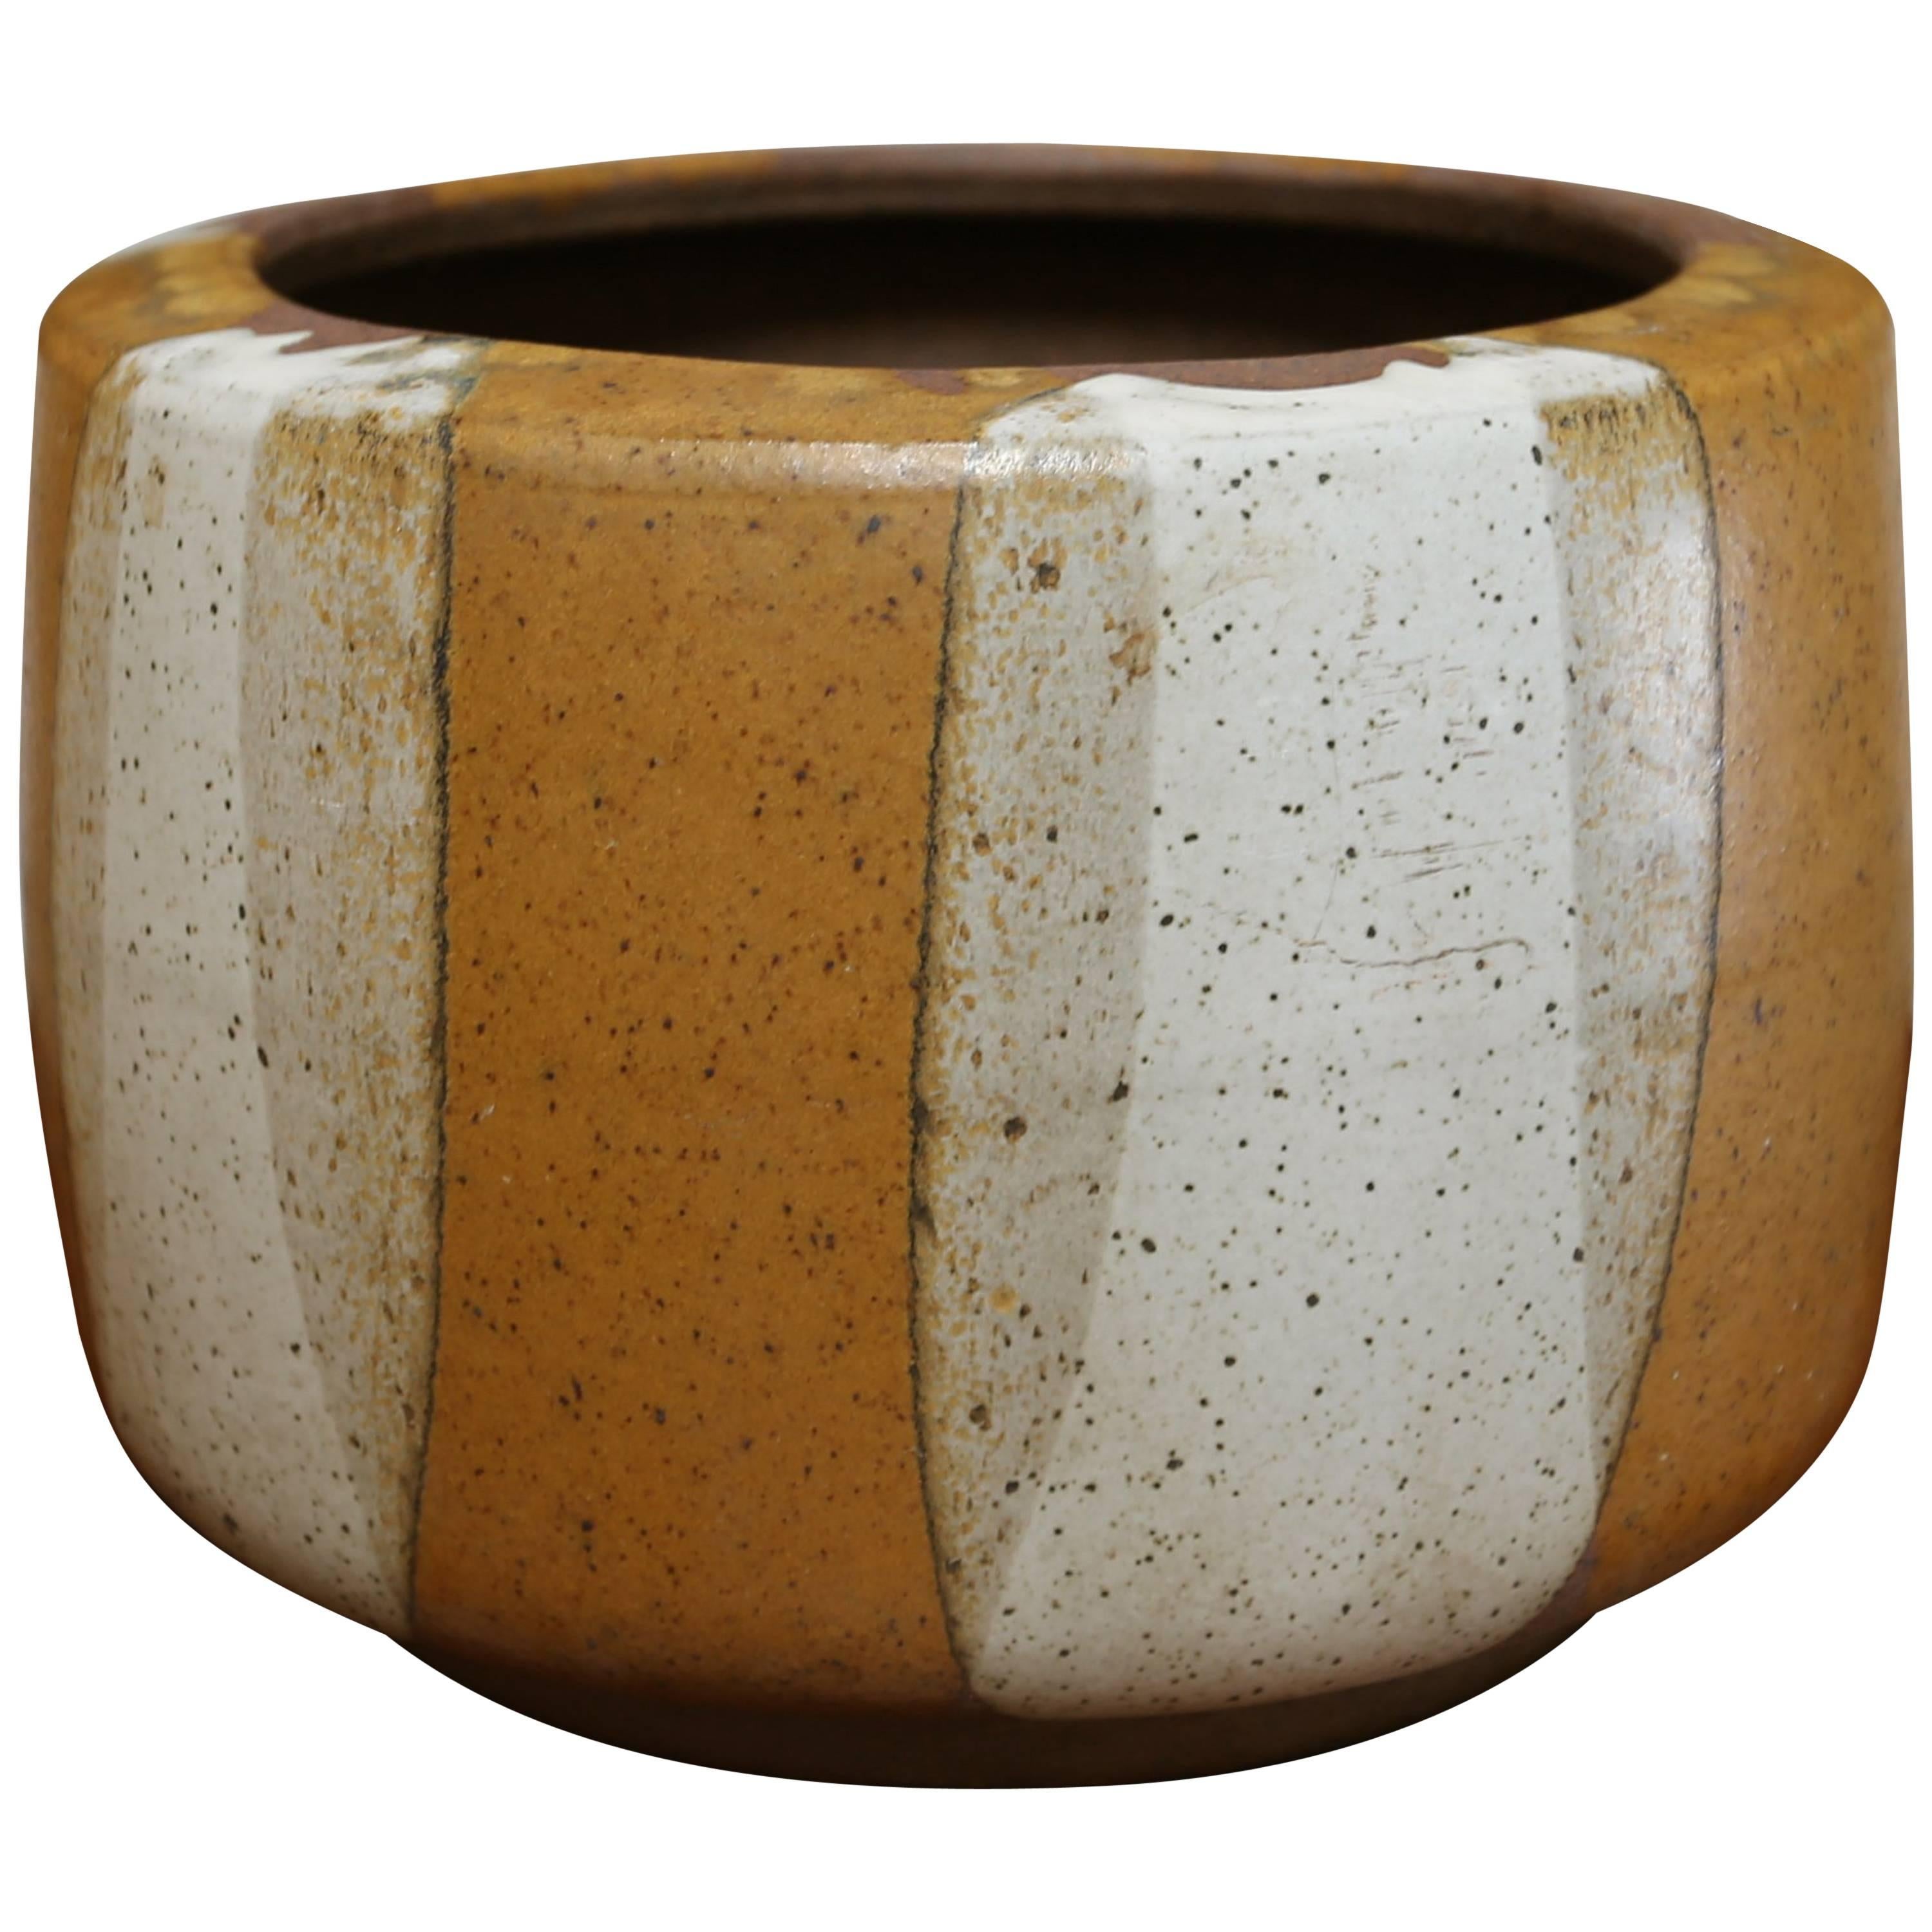 Flame Glazed Planter by David Cressey for Architectural Pottery